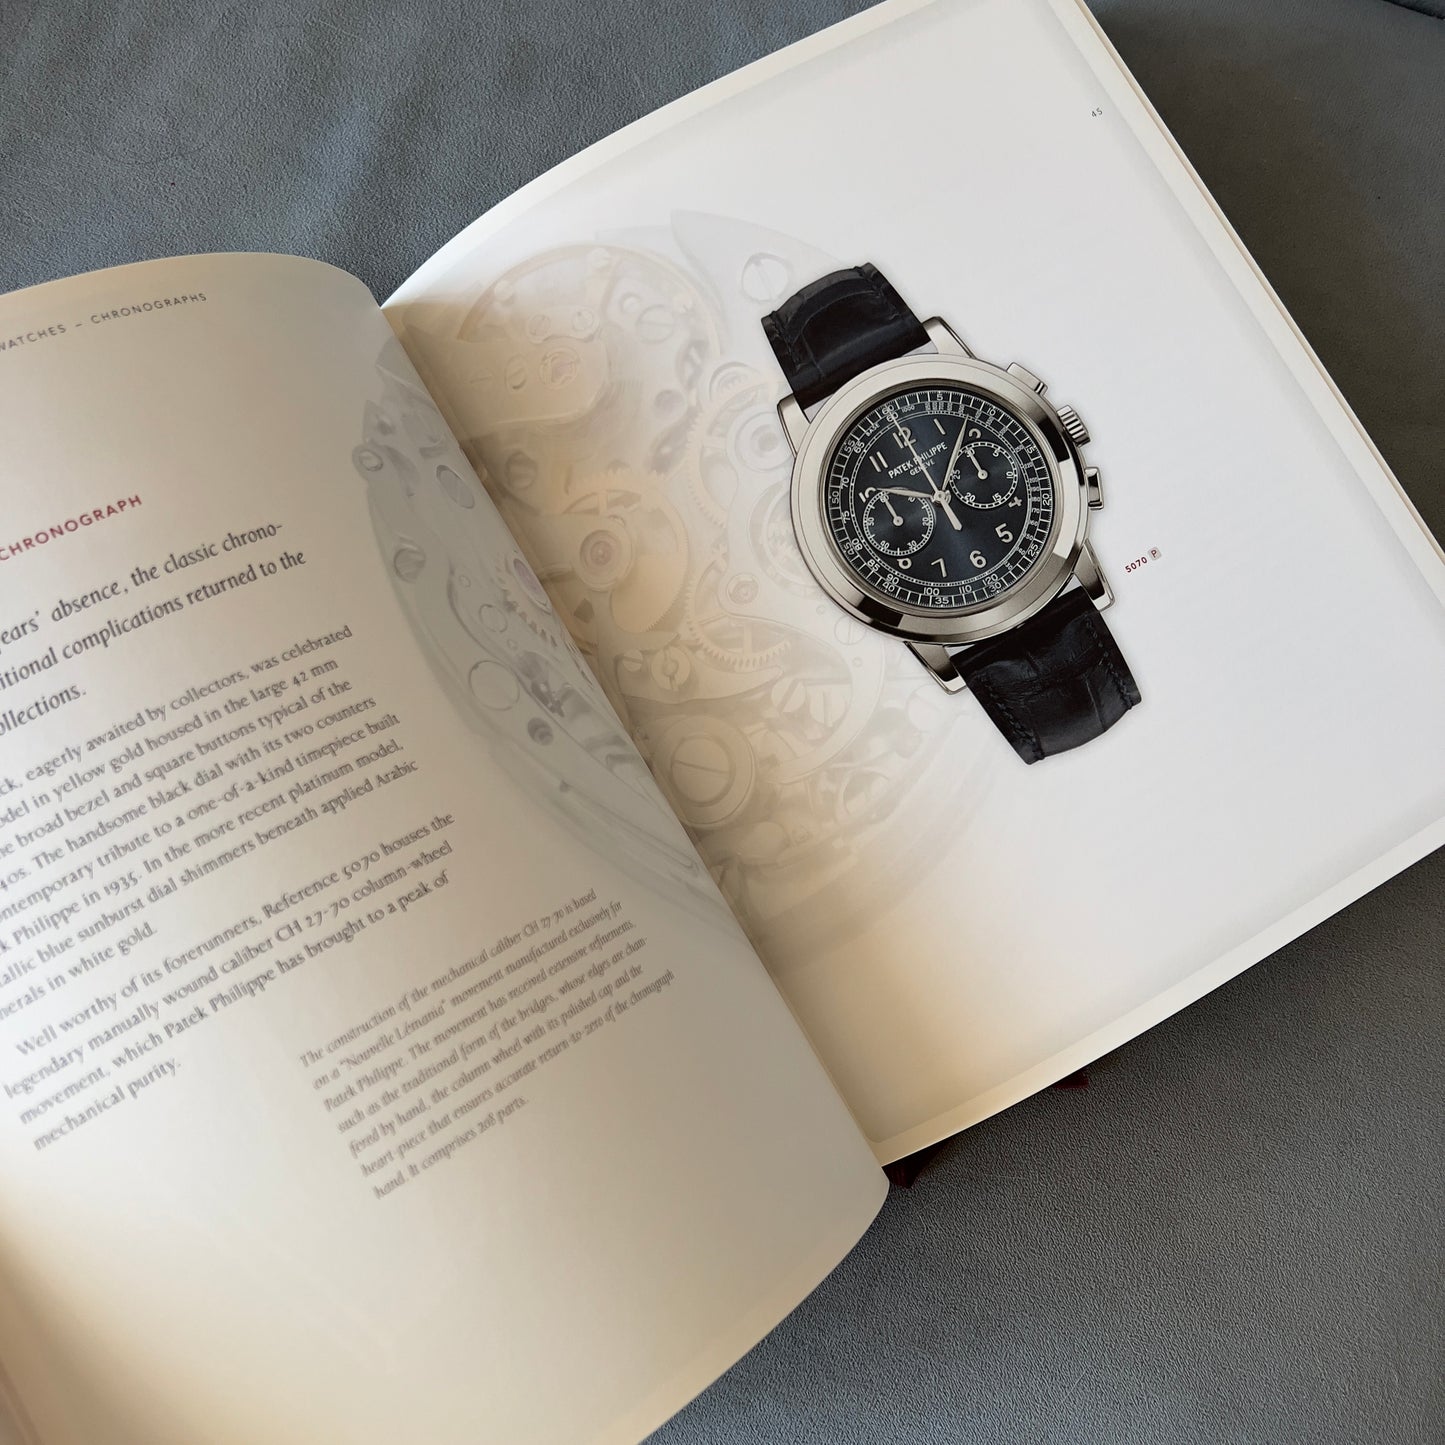 PATEK PHILIPPE Genève Collection 2009-2010 Collectable Table Book